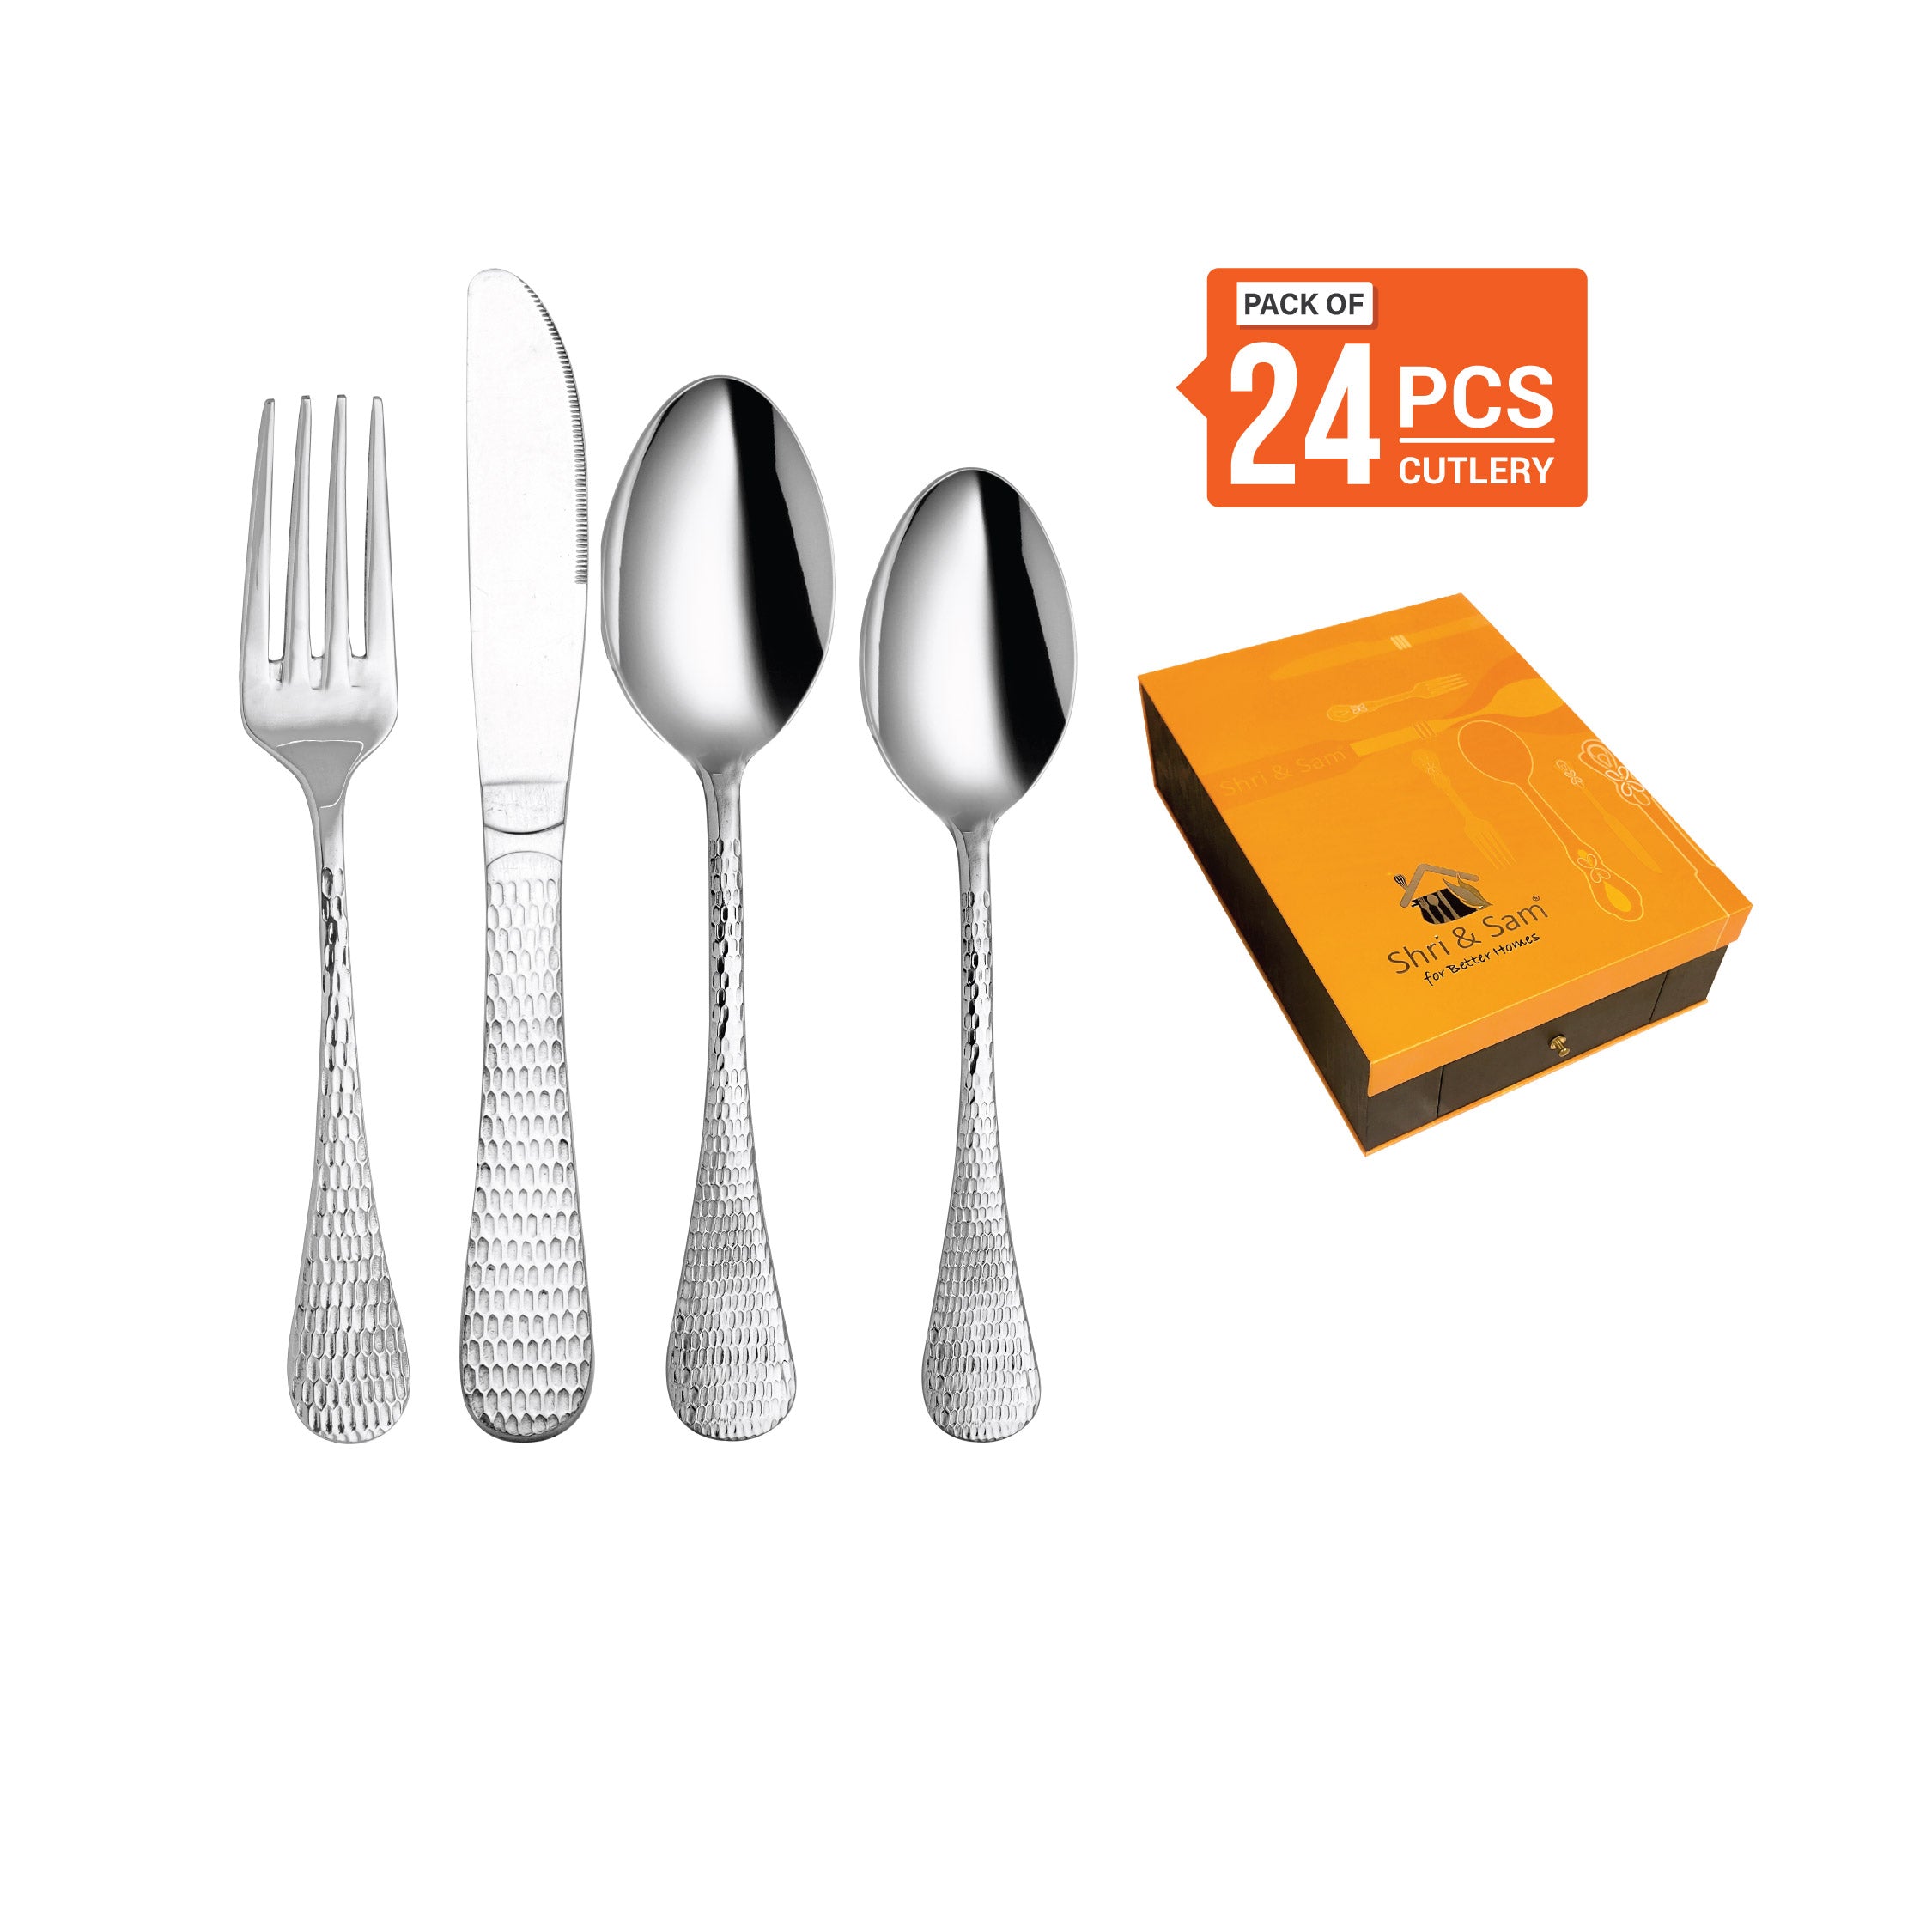 Stainless Steel 24 PCS Cutlery Set New Rosemary Hammered